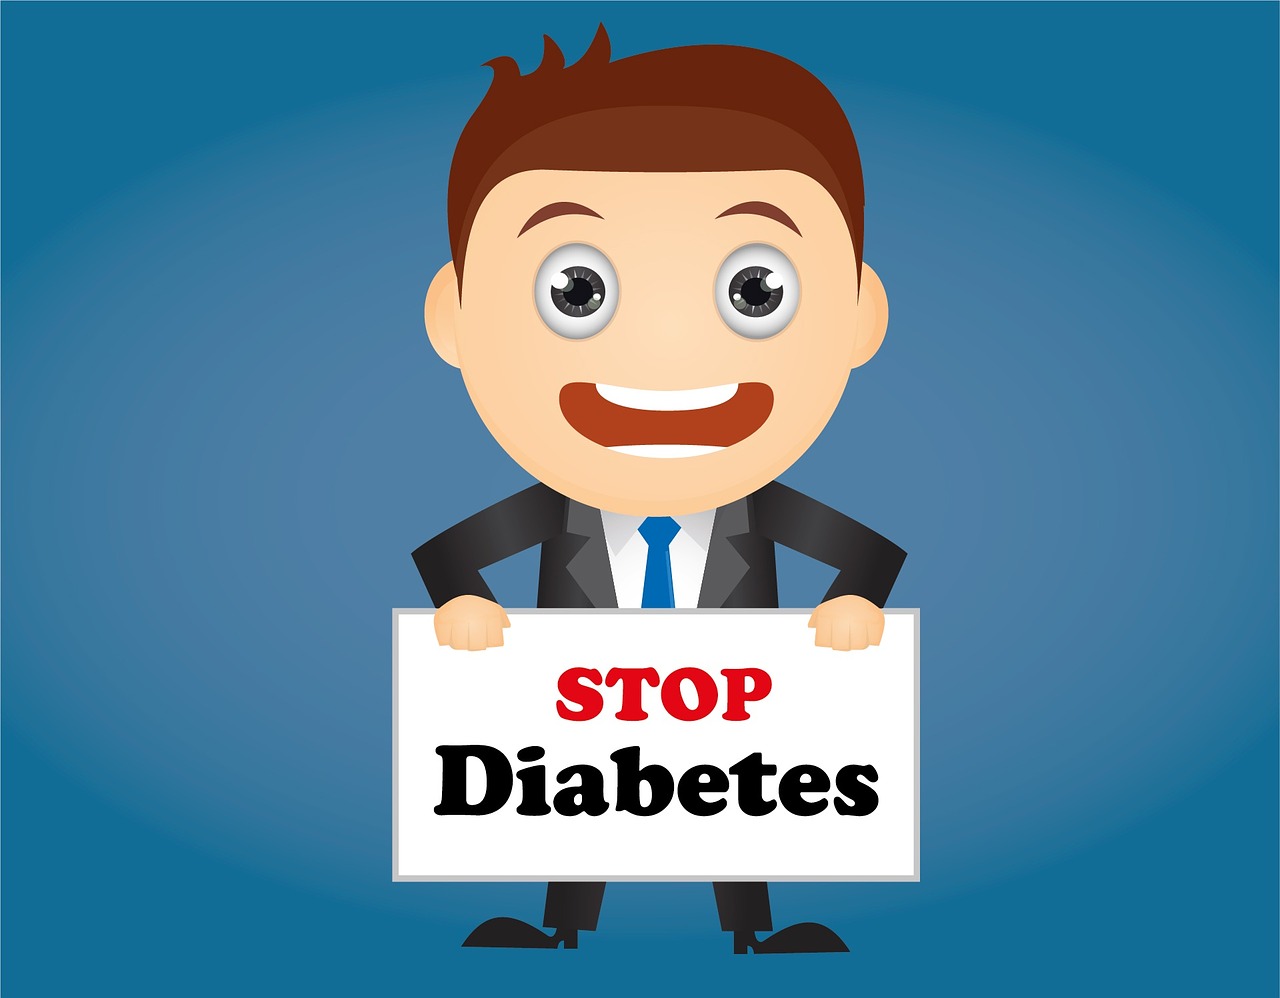 Diabetes is recognized as one of the civilizational diseases. We have to act!